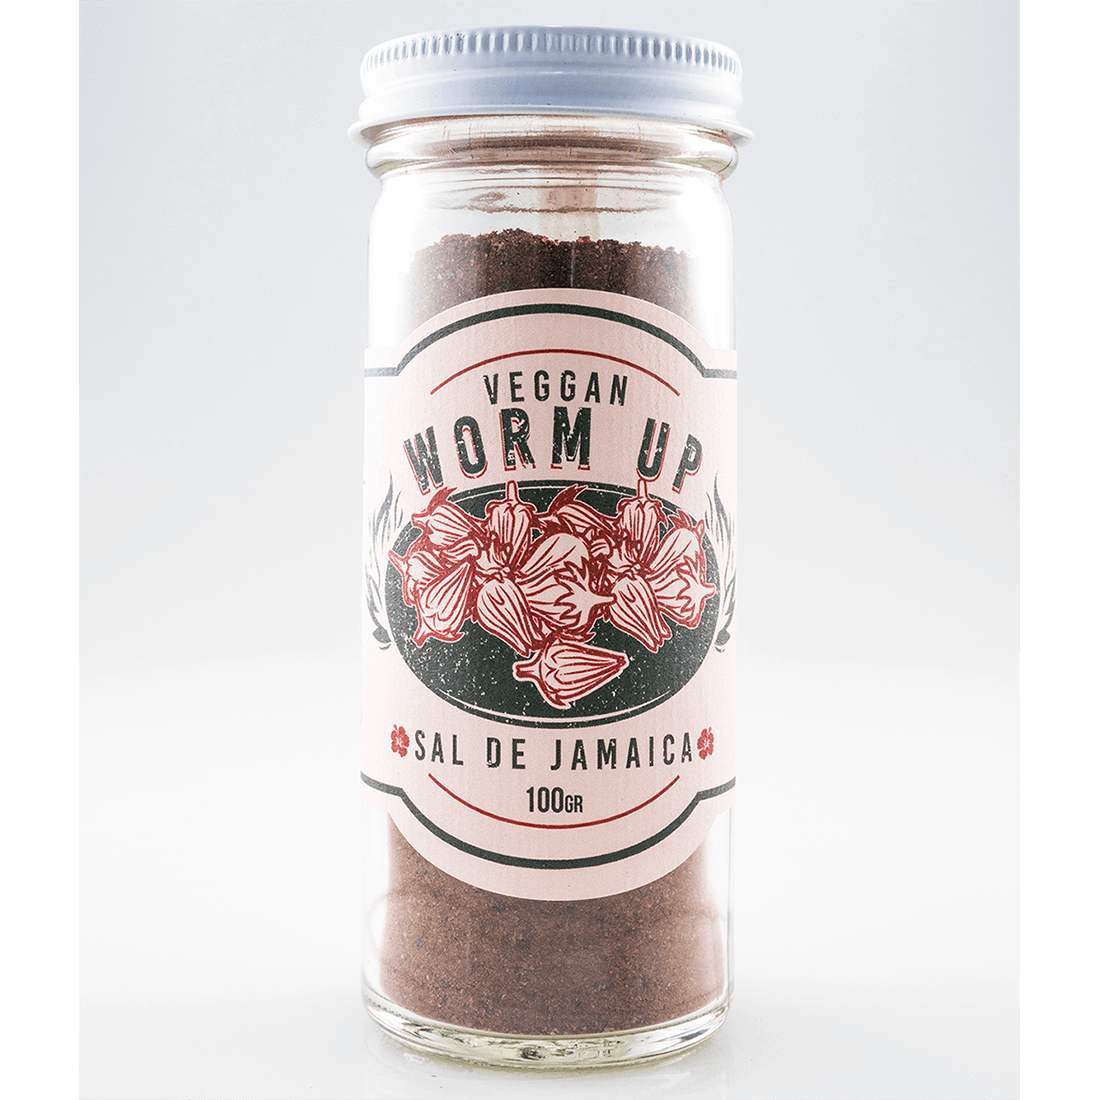 Featured image for “Worm Up Vegan Hibiscus Chipotle Salt”